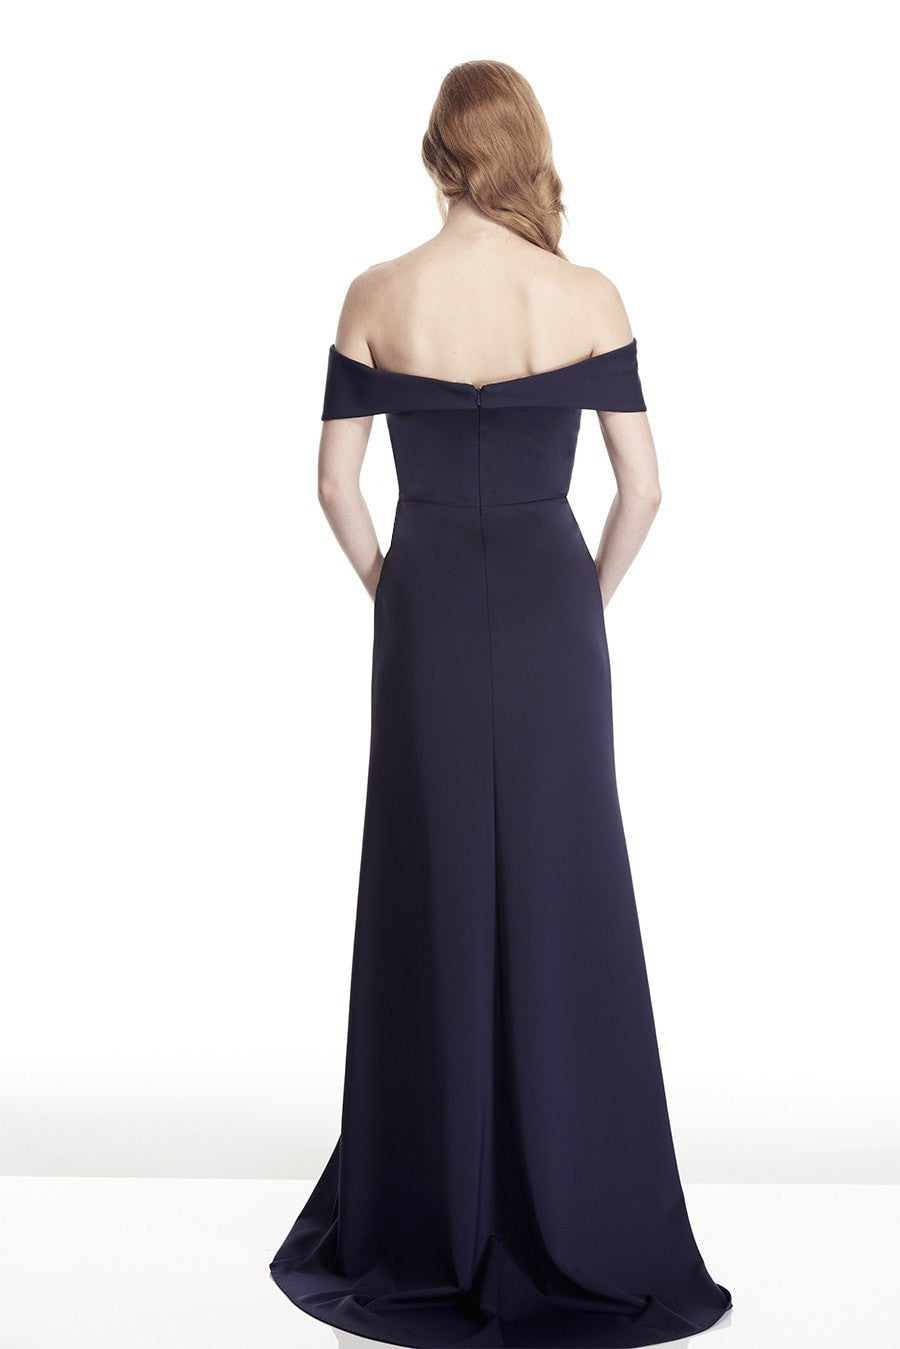 Tinaholy Couture T17115 Navy Off Shoulder Formal Gown Dress Tina Holly Couture$ AfterPay Humm ZipPay LayBuy Sezzle